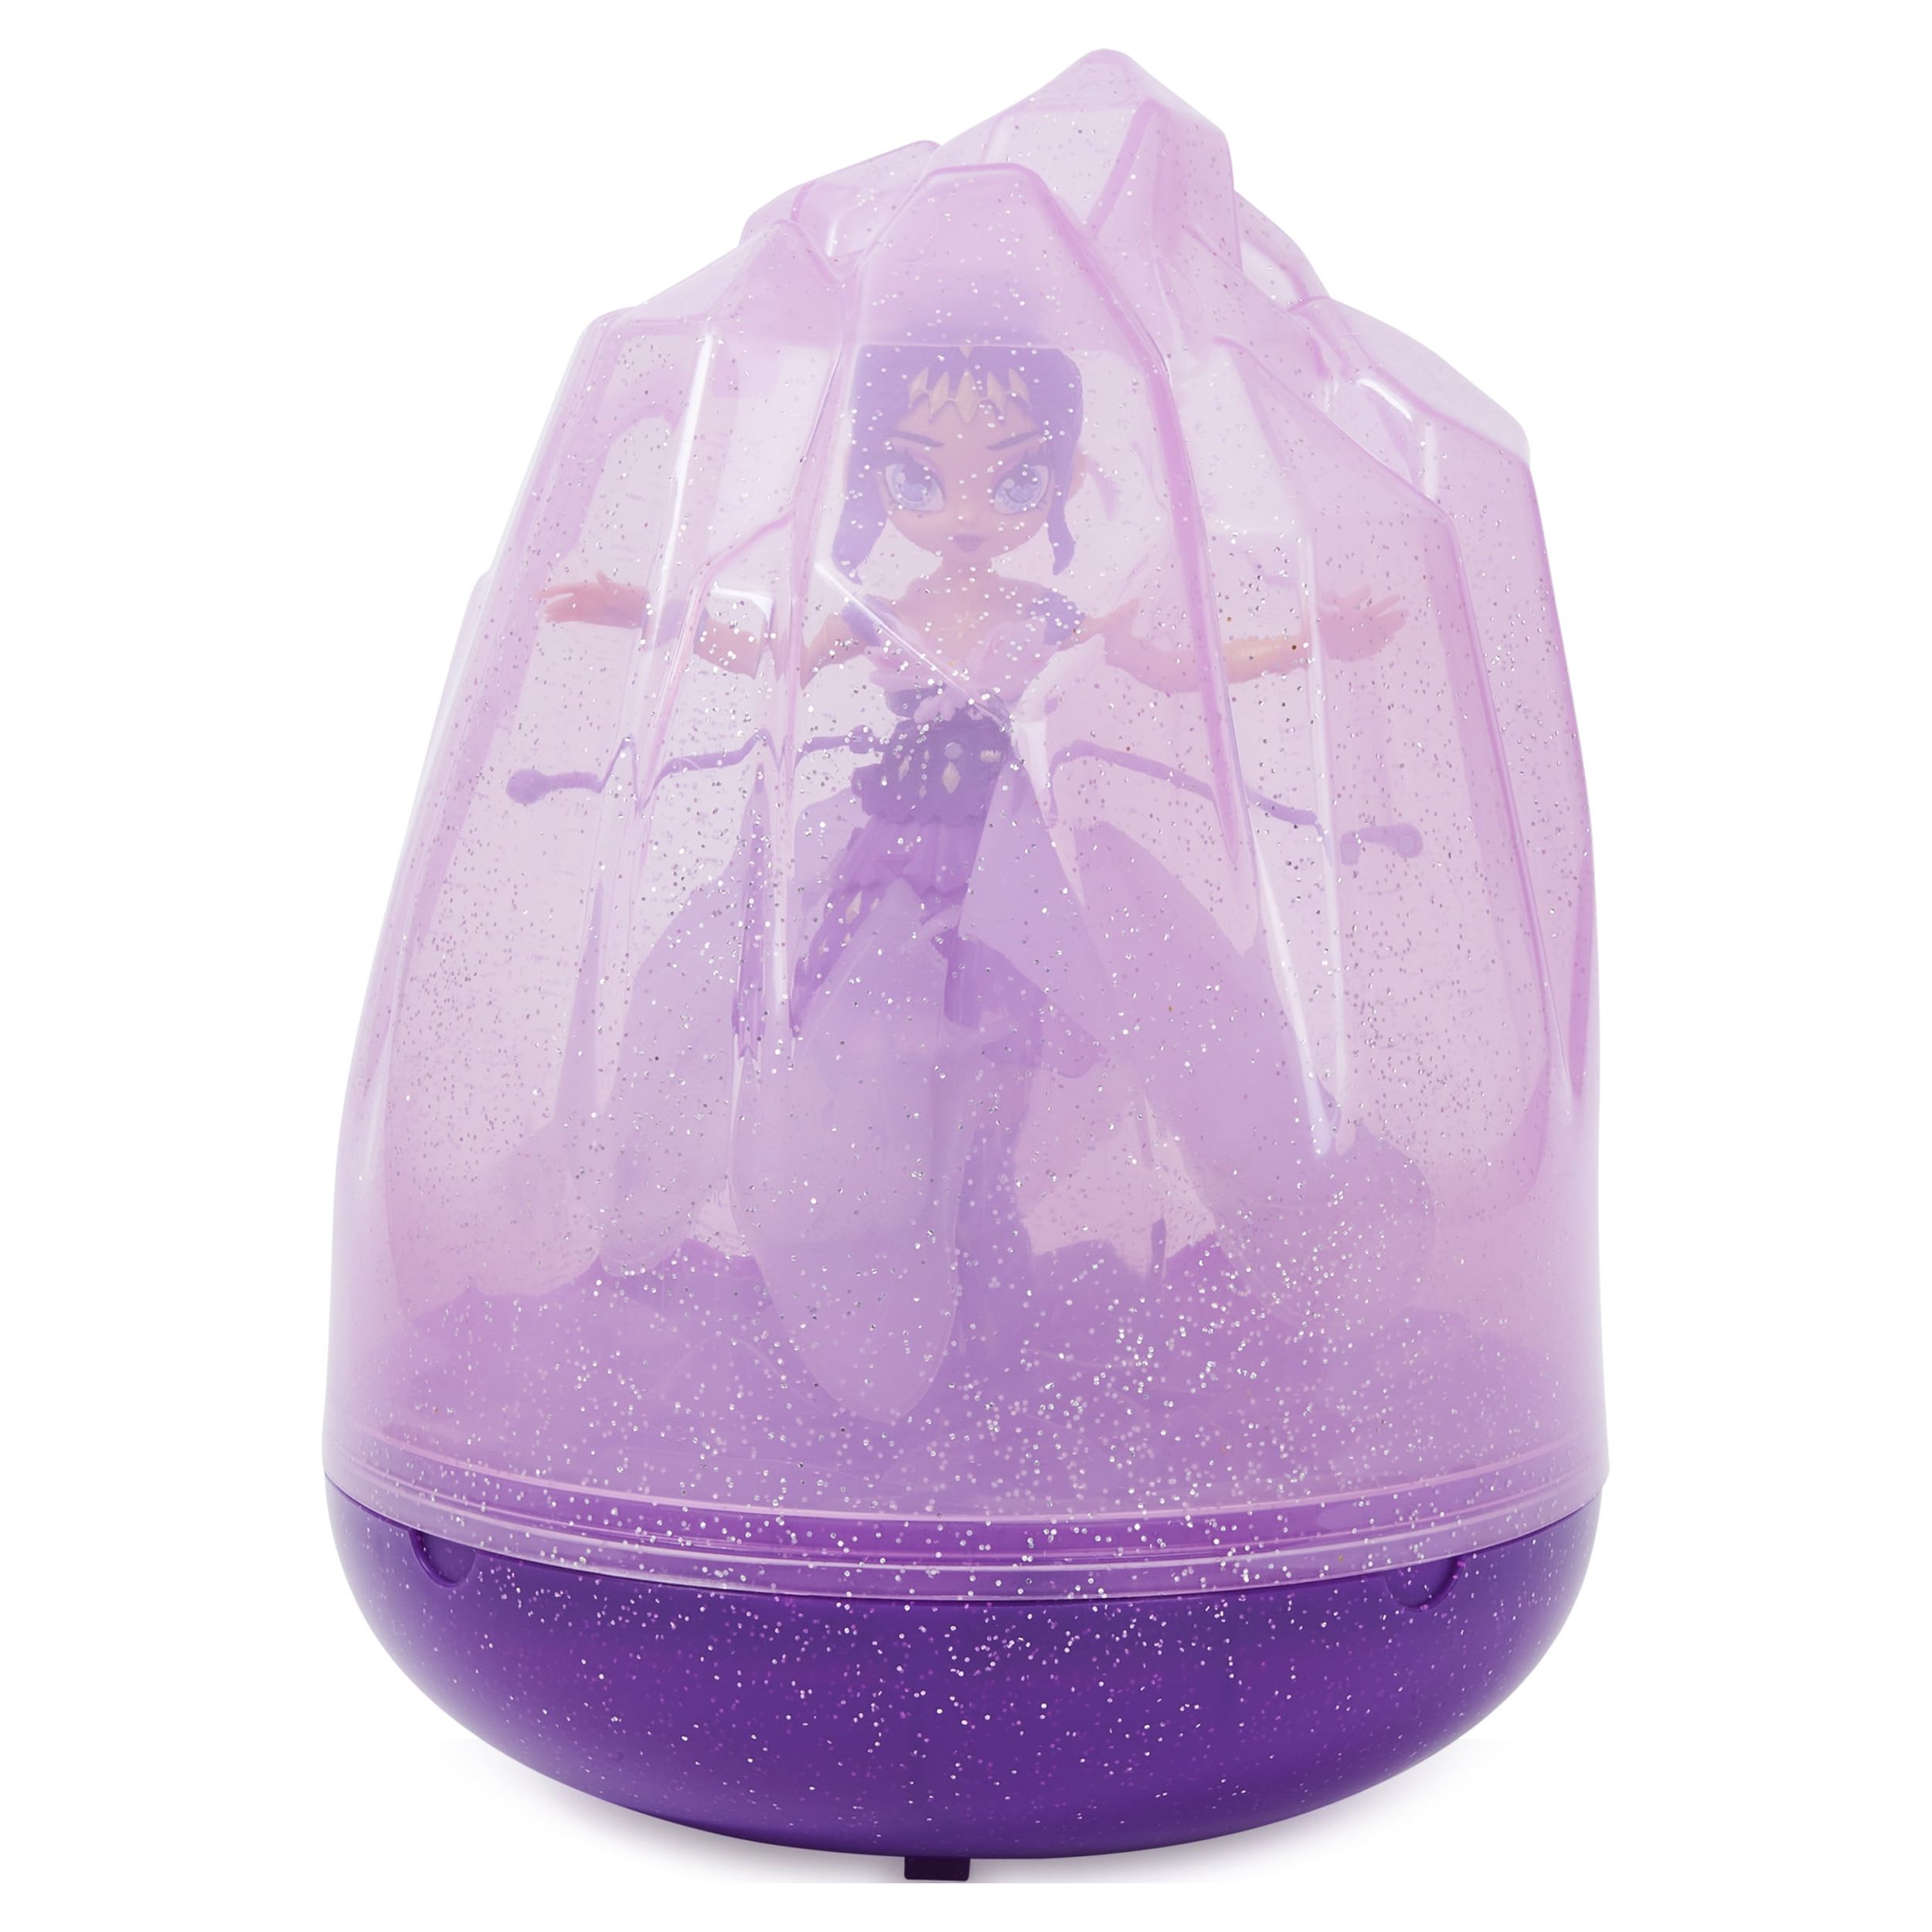 Hatchimals Pixies, Crystal Flyers Purple Magical Flying Pixie Toy, for Kids Aged 6 and up - image 4 of 9